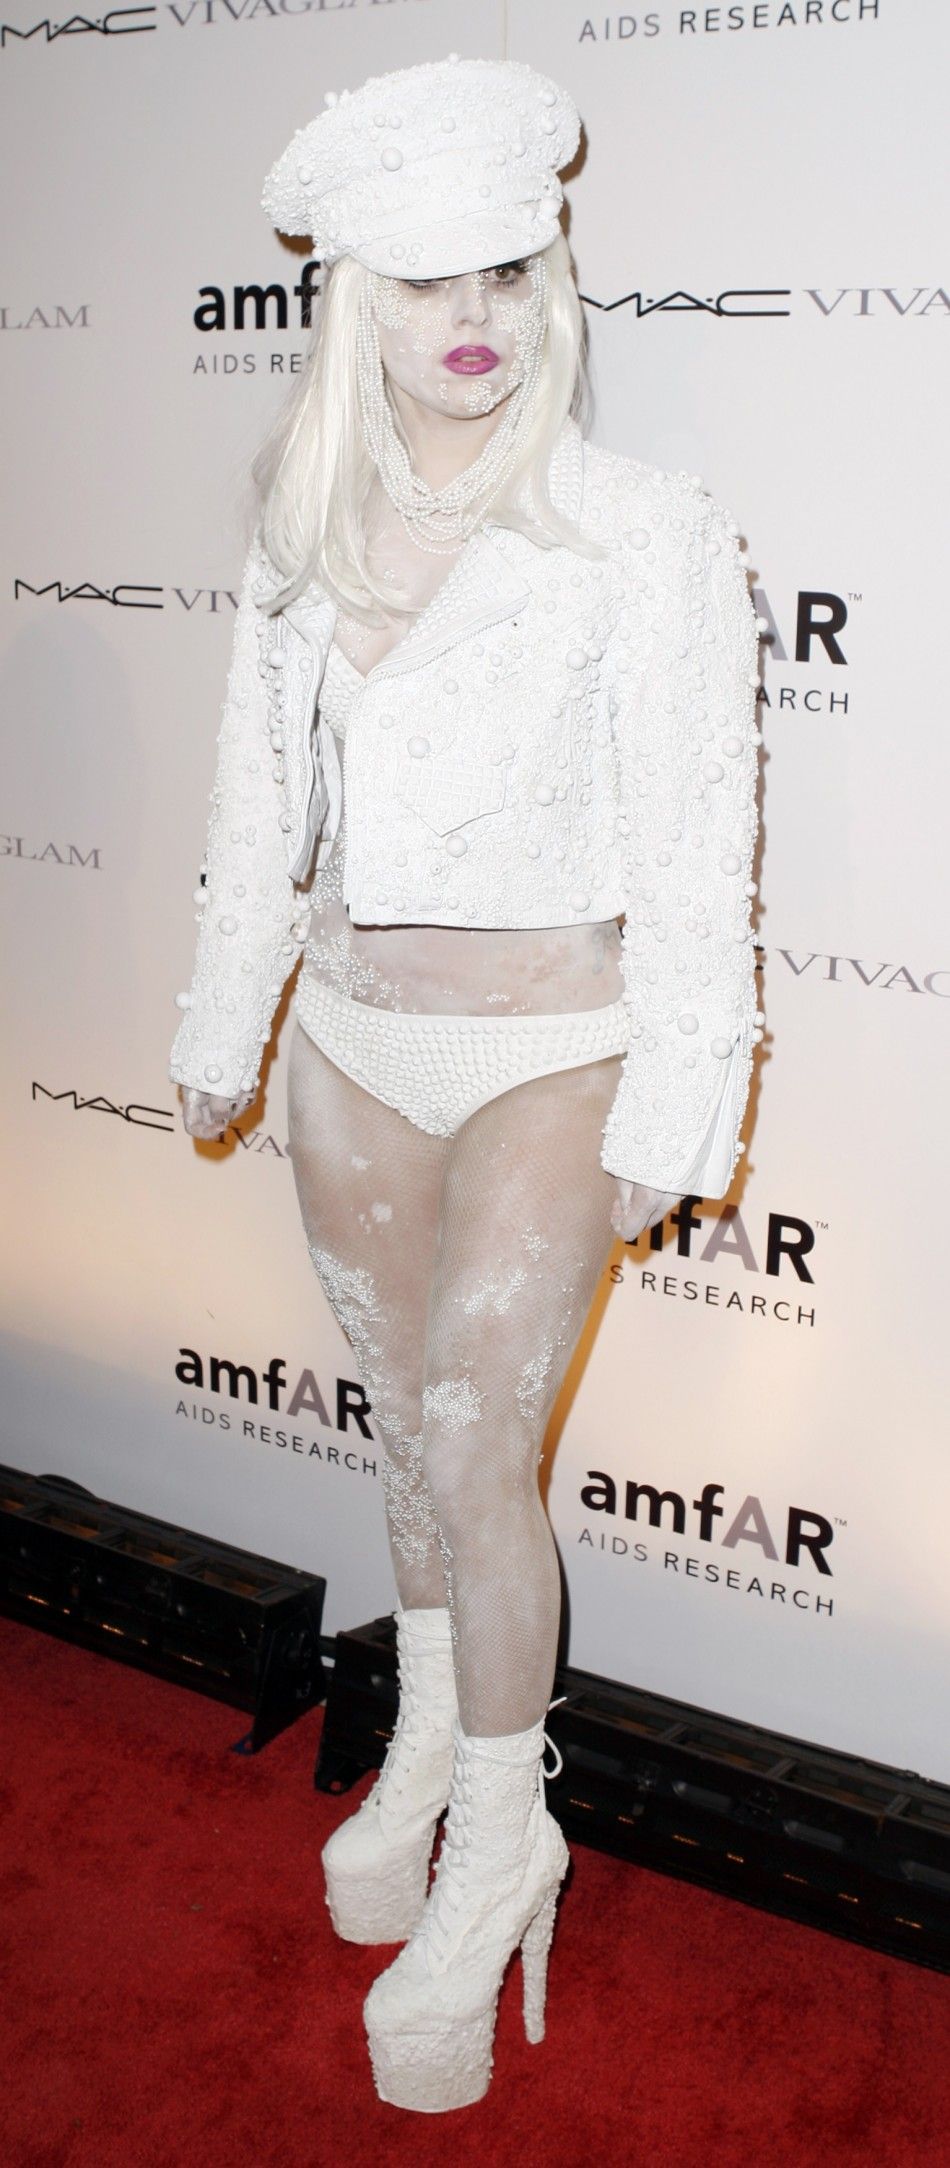 Singer Lady Gaga arrives for the amFAR The Foundation for AIDS Research annual gala to kick off Fashion Week in New York February 10, 2010 